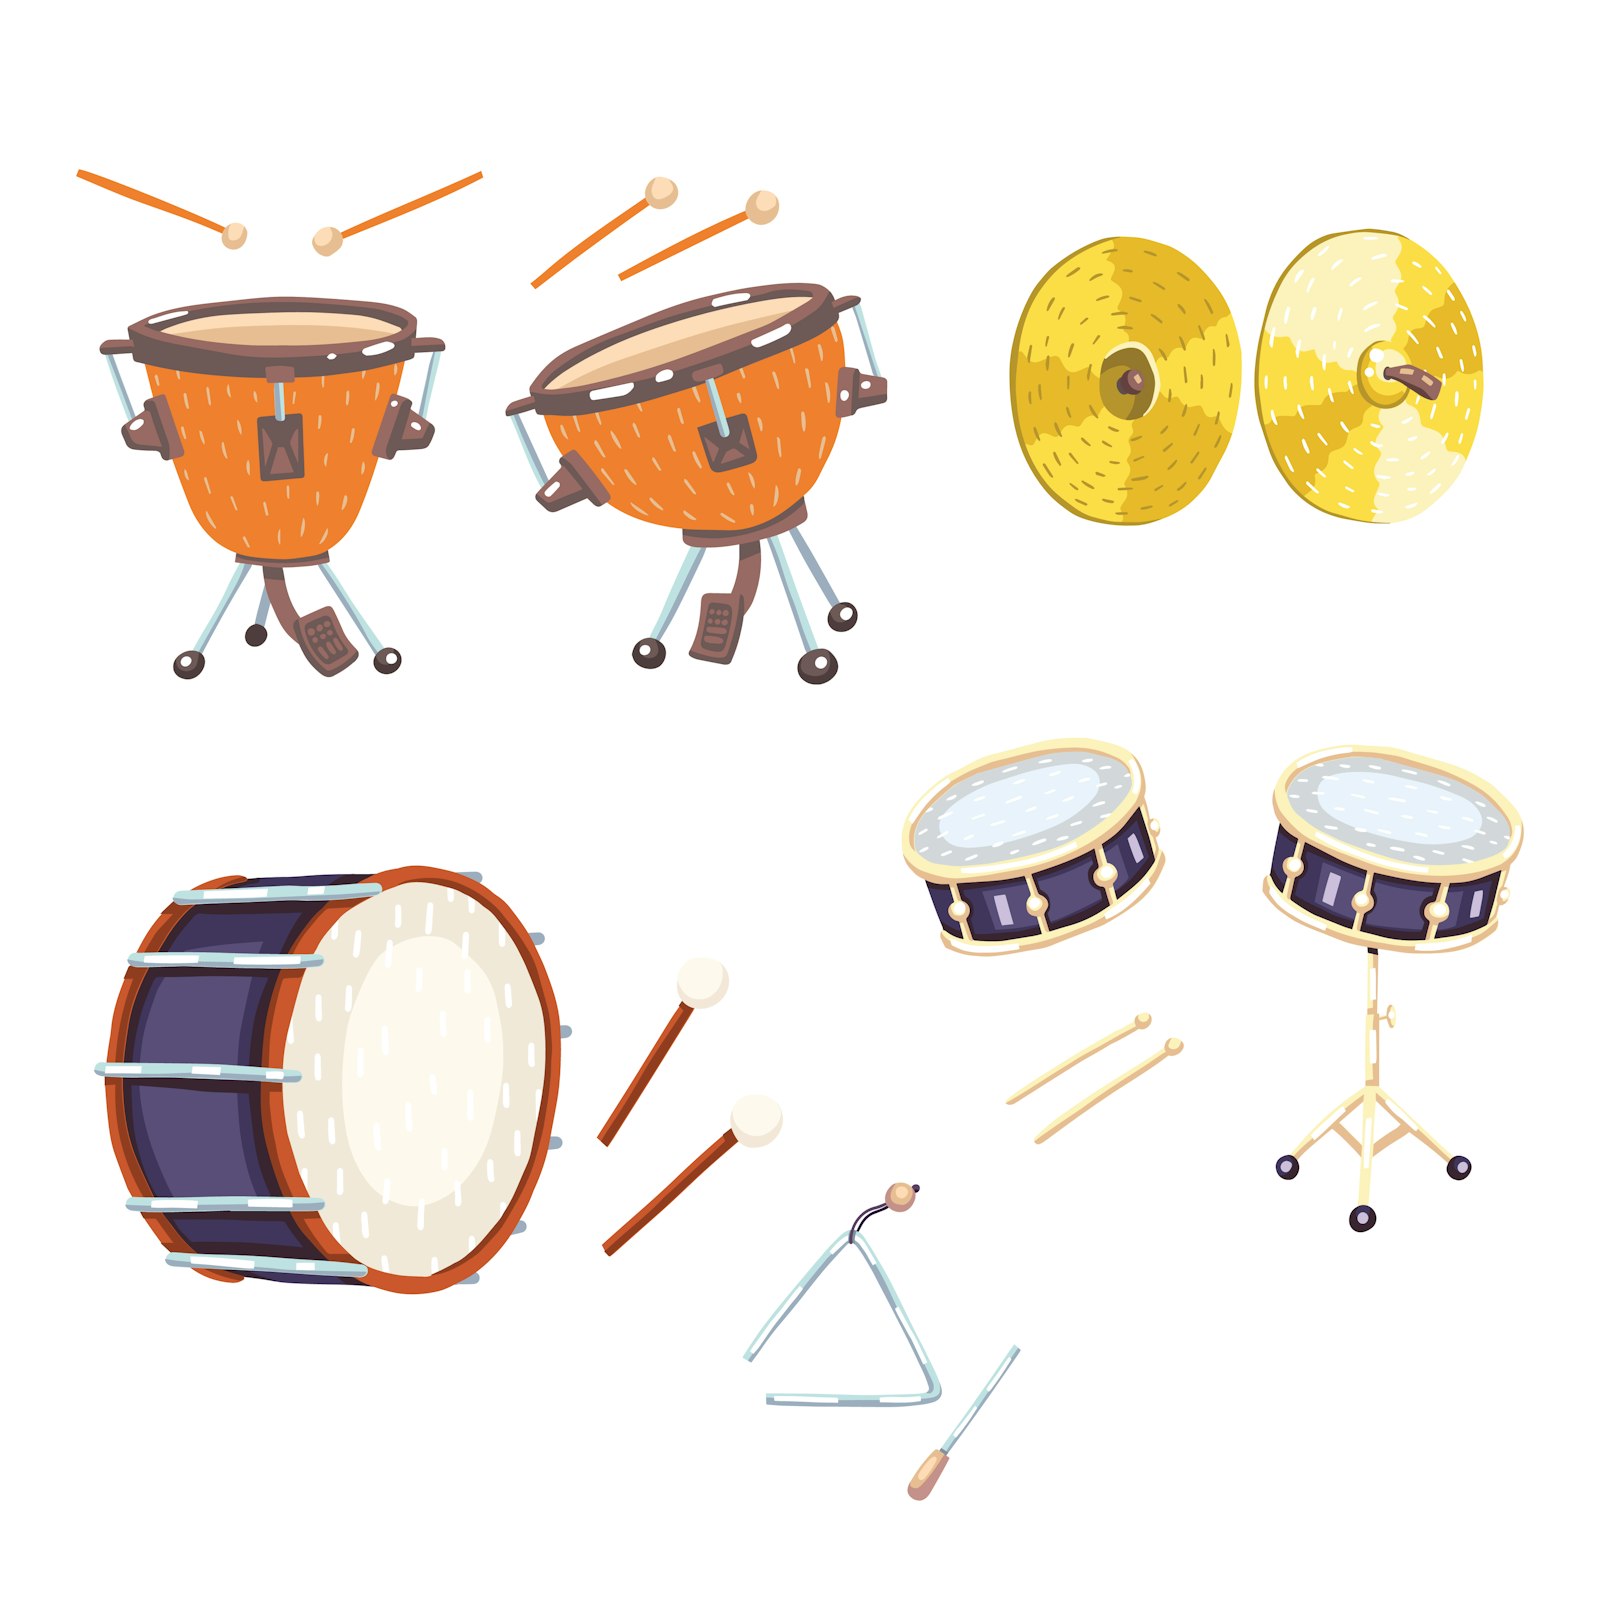 San Francisco Symphony - Instrument of the Month: Snare Drum